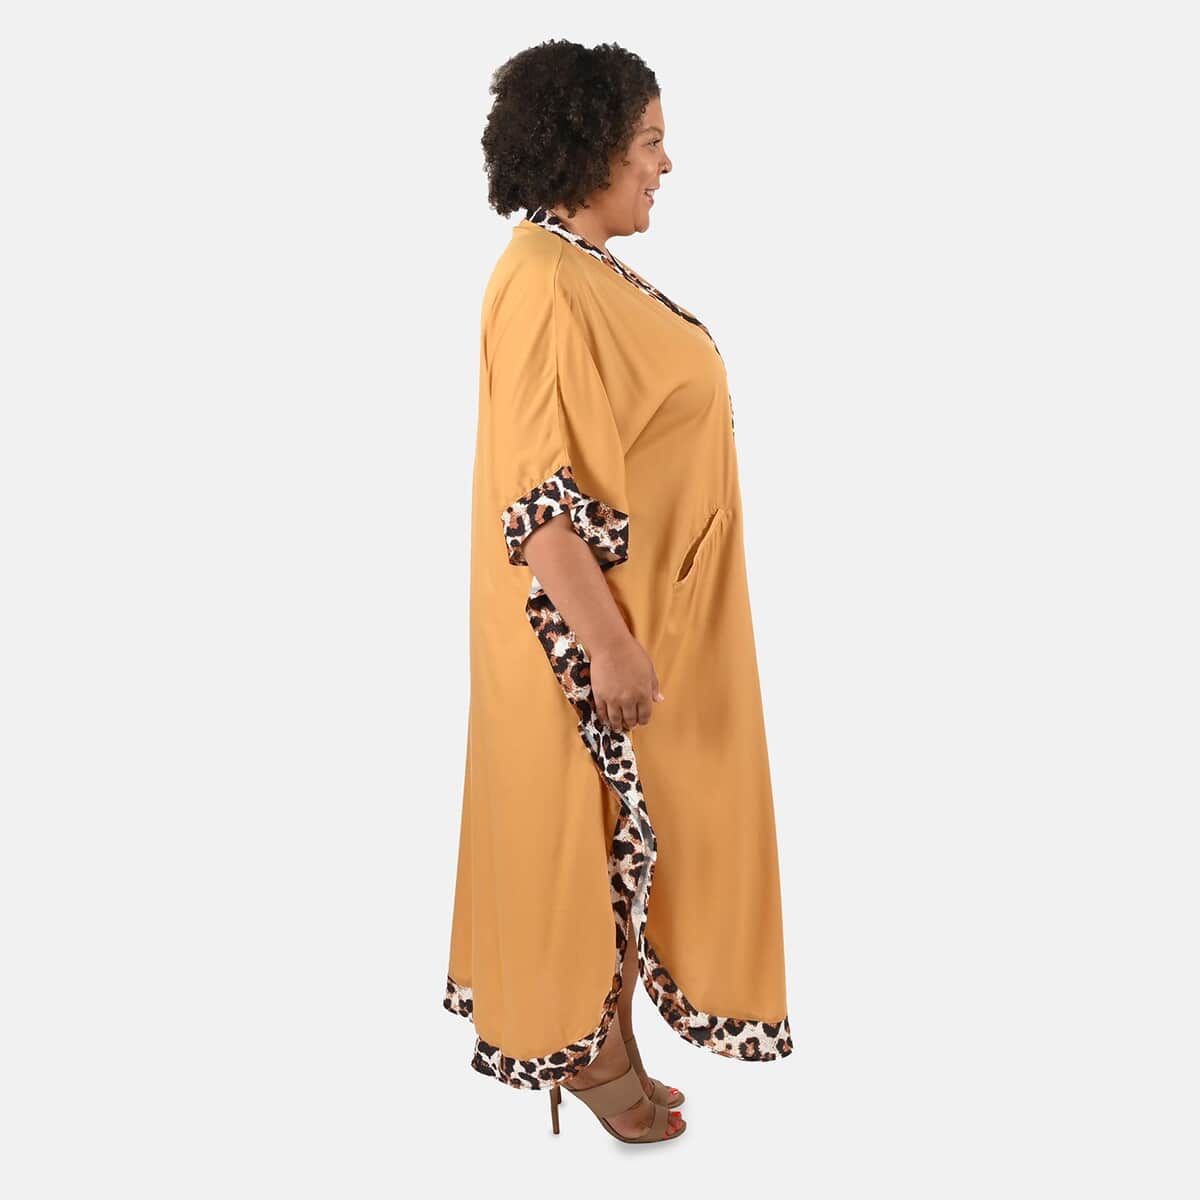 TAMSY Tan Solid American Crepe Long Kaftan With Printed Outerline - One Size Fits Most image number 2